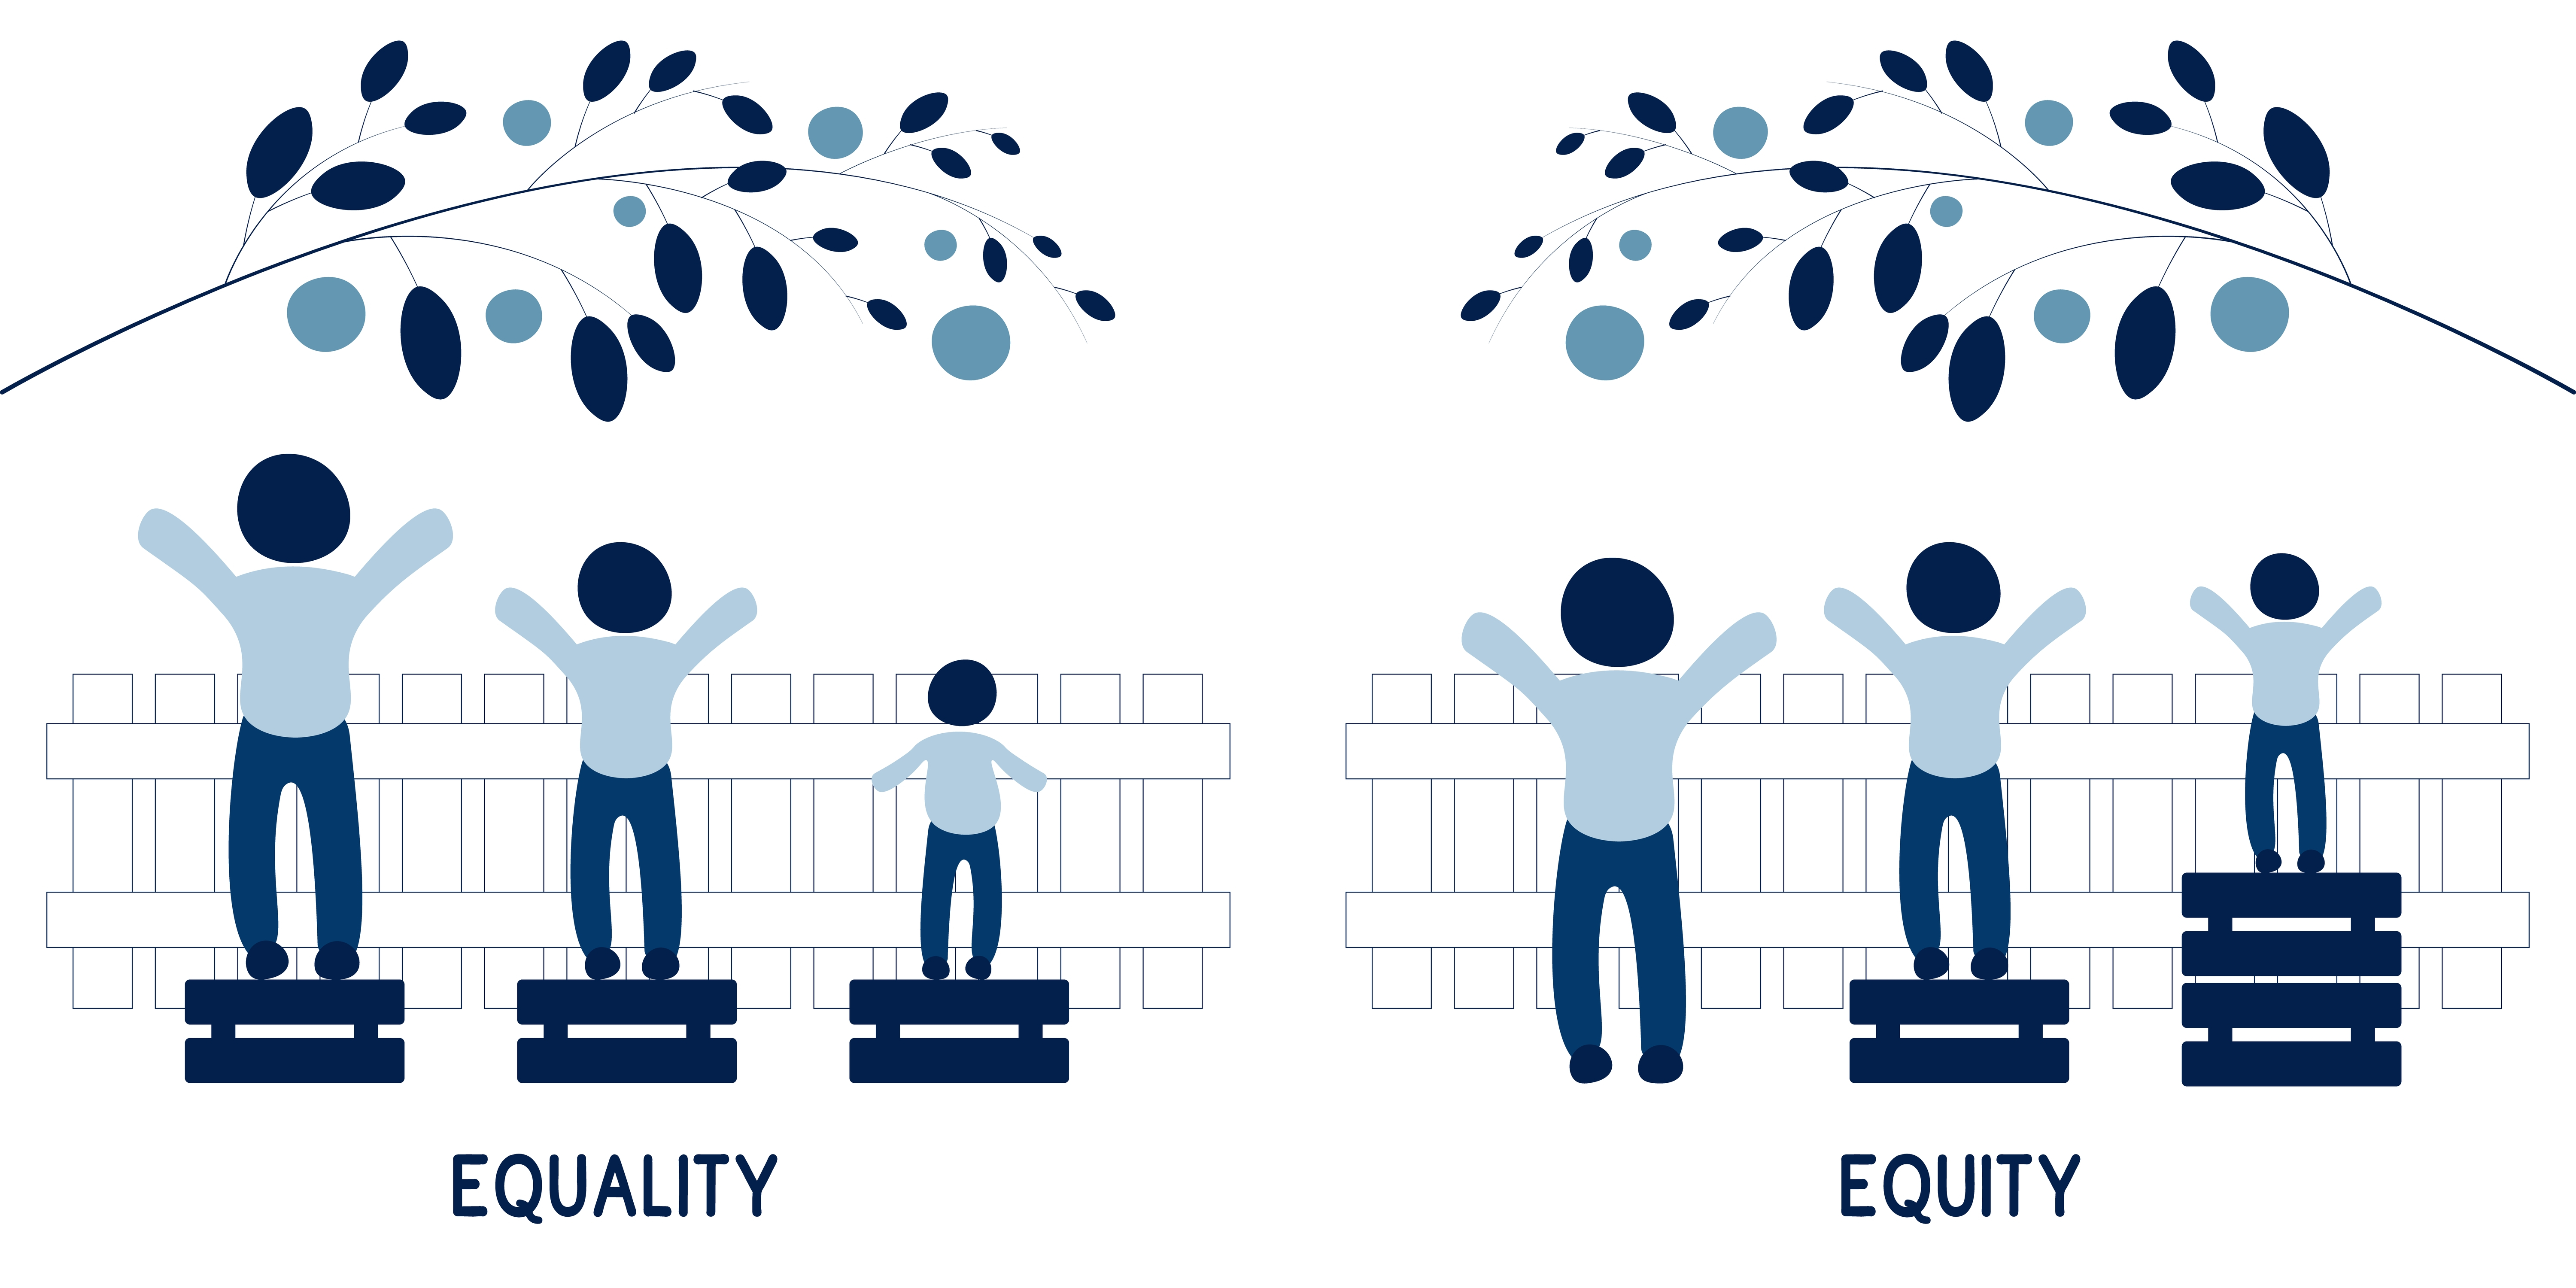 Equality gives each person a platform of the same size to stand on, but only the tallest can reach their target. Equity gives people different sized platforms, so everyone has an equal reach.